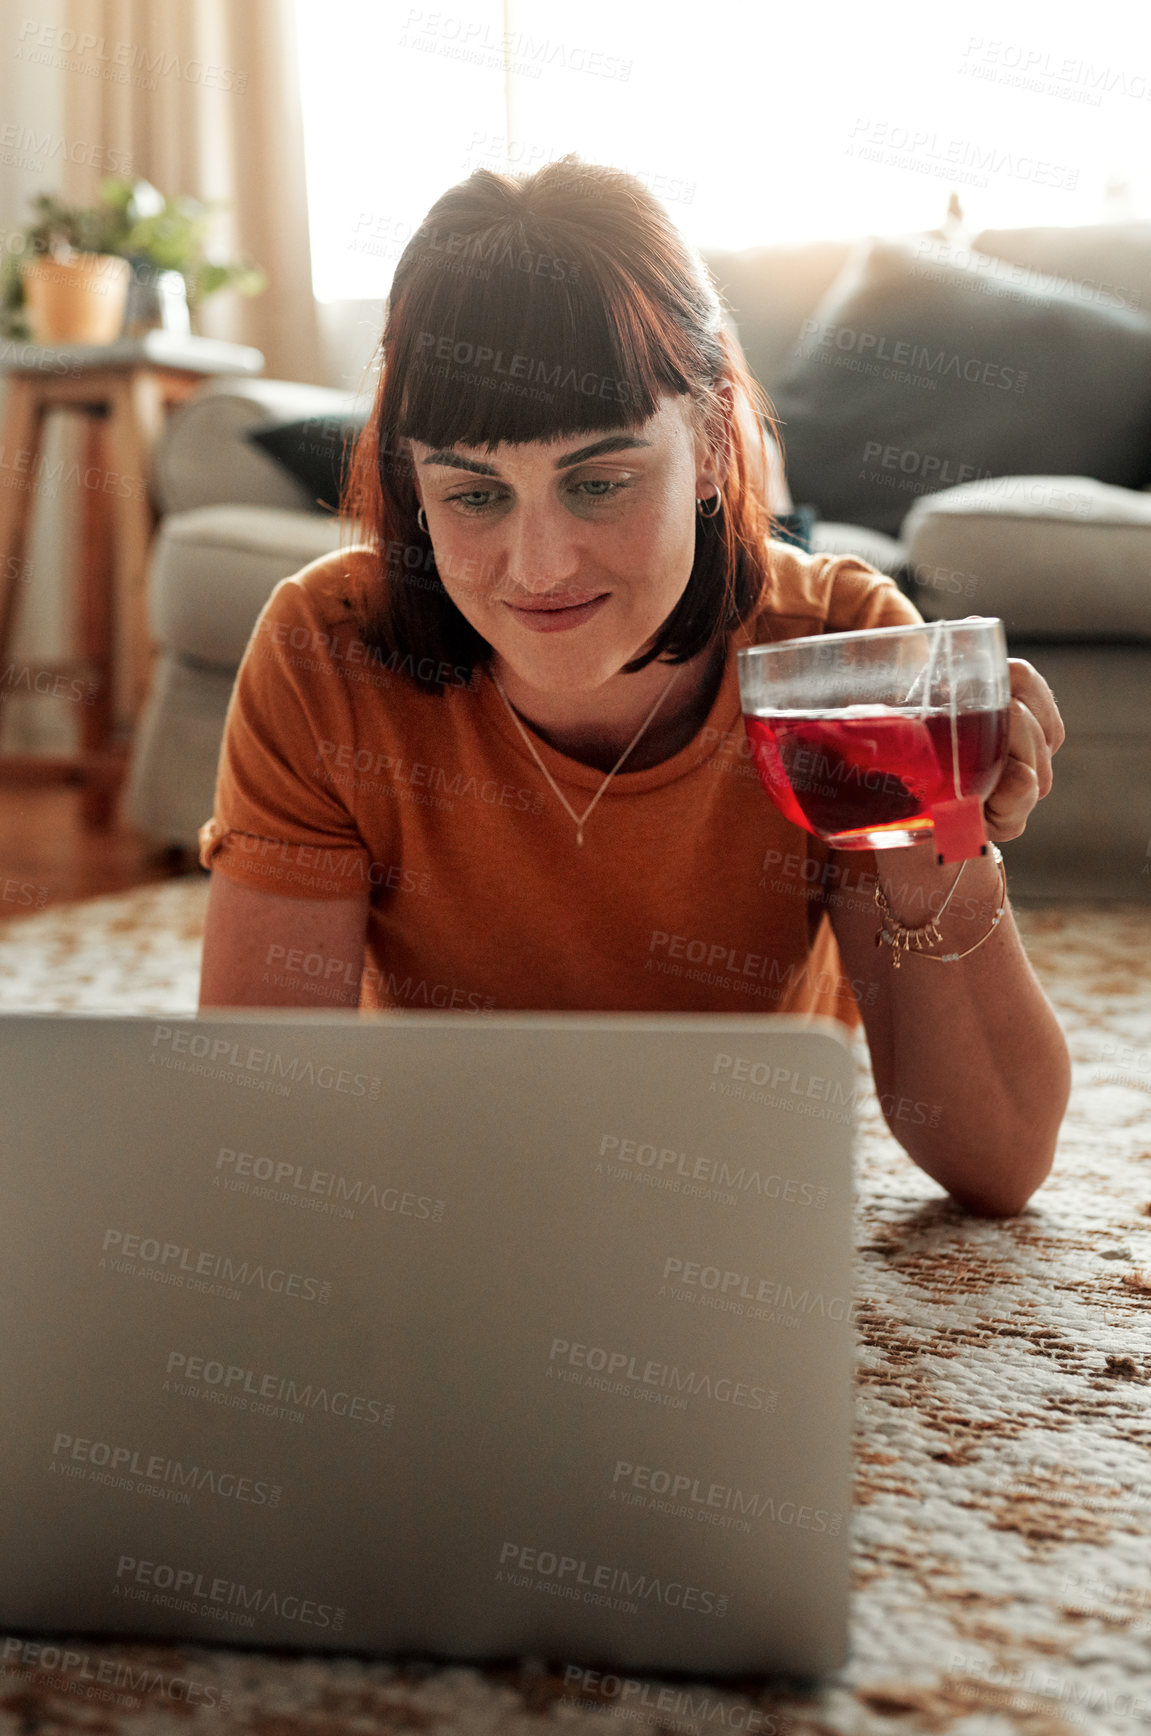 Buy stock photo Shot of a woman using her laptop while relaxing at home